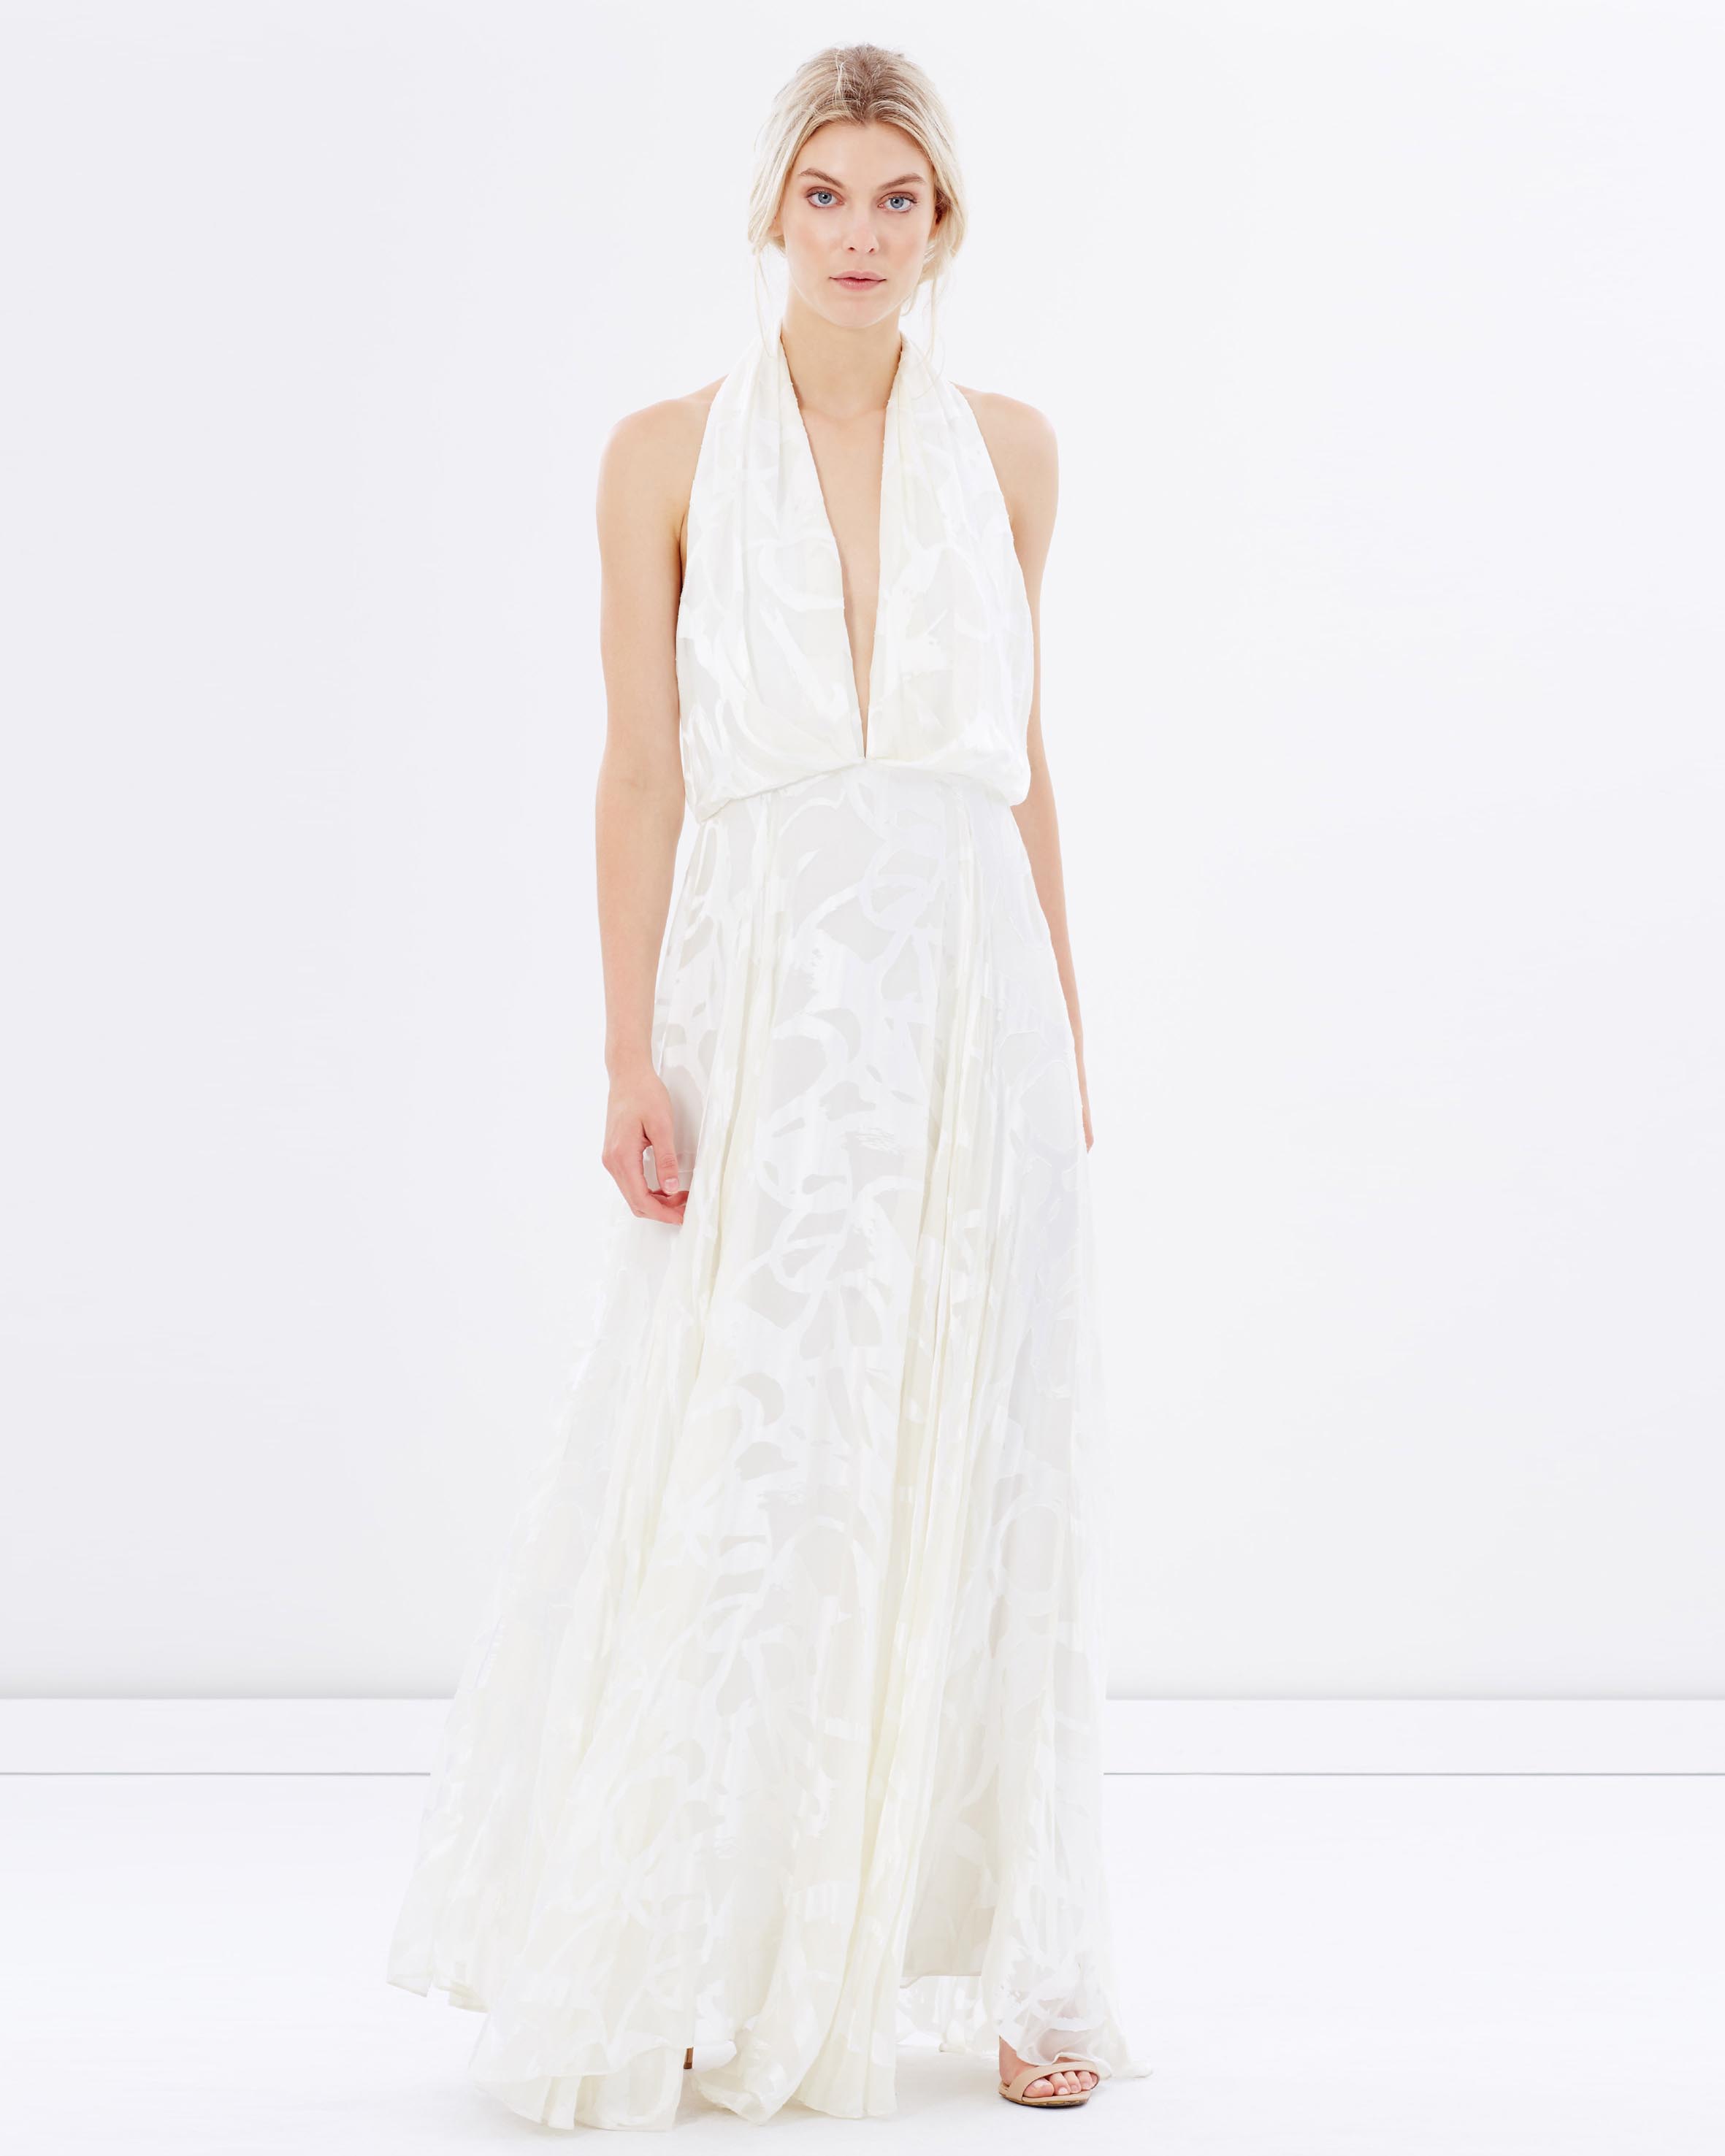 10 Super-Affordable Wedding Dresses That Look Anything But